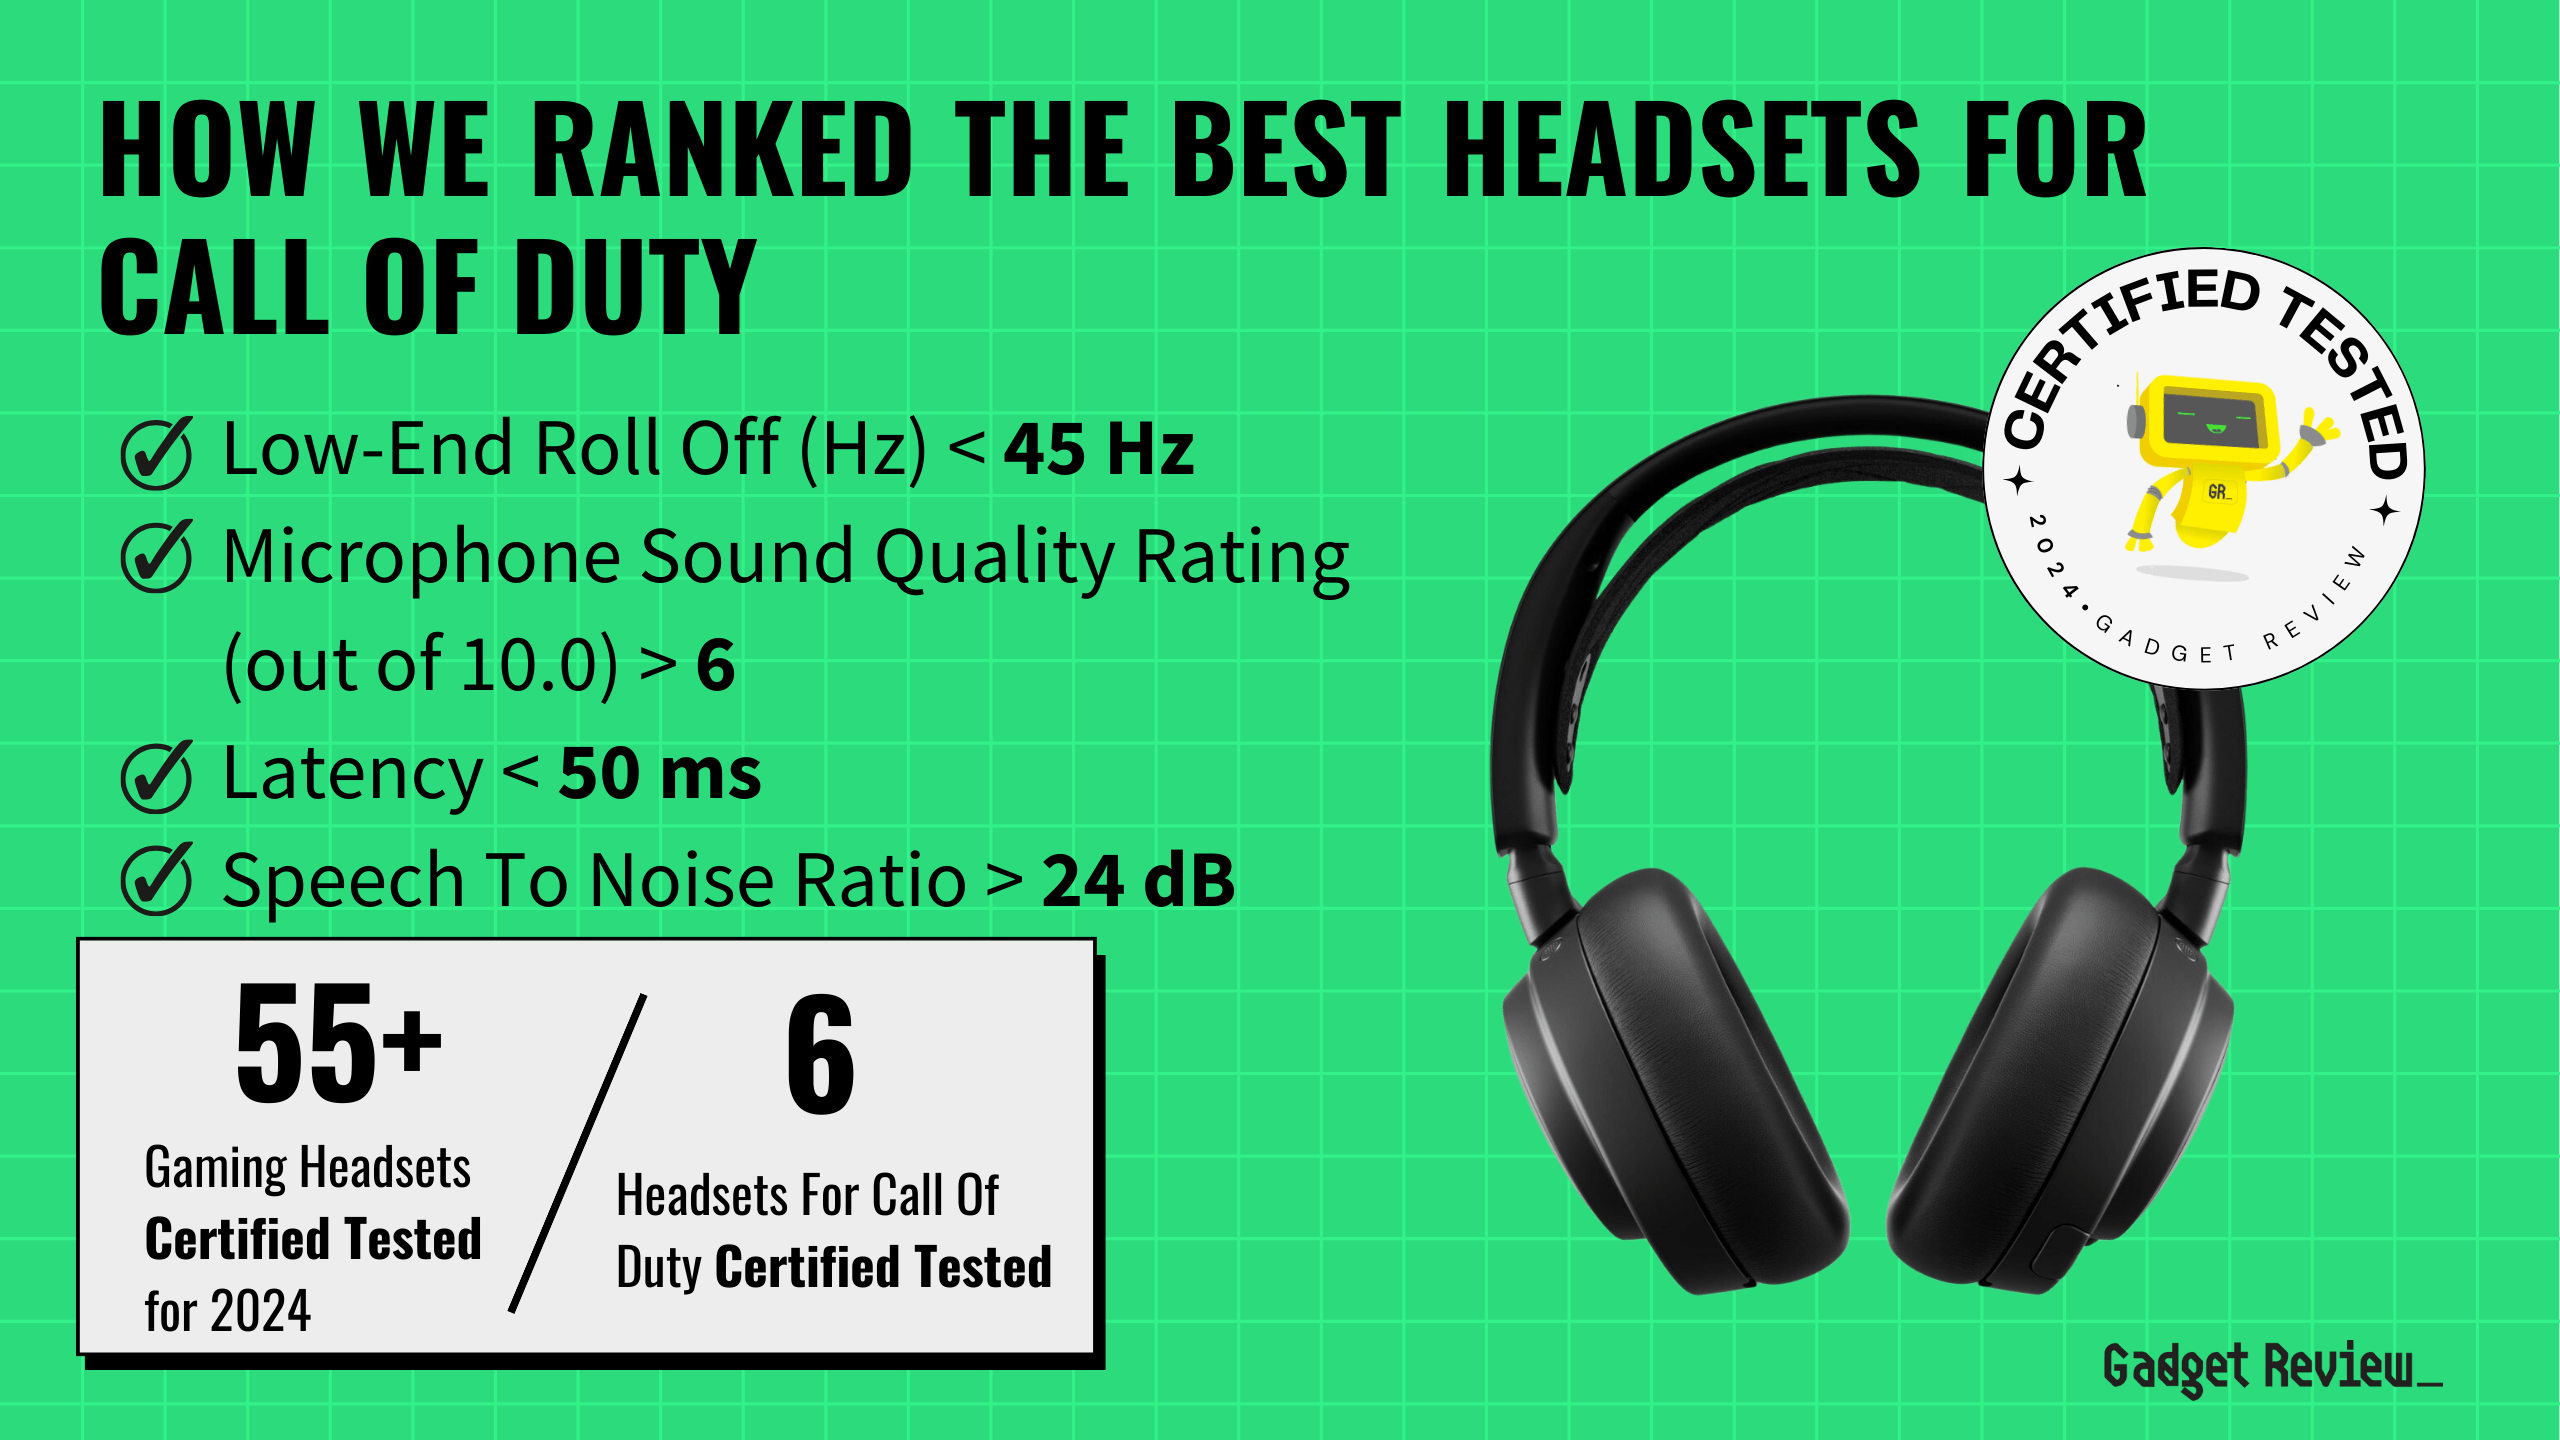 best headset for call of duty guide that shows the top best gaming headset model